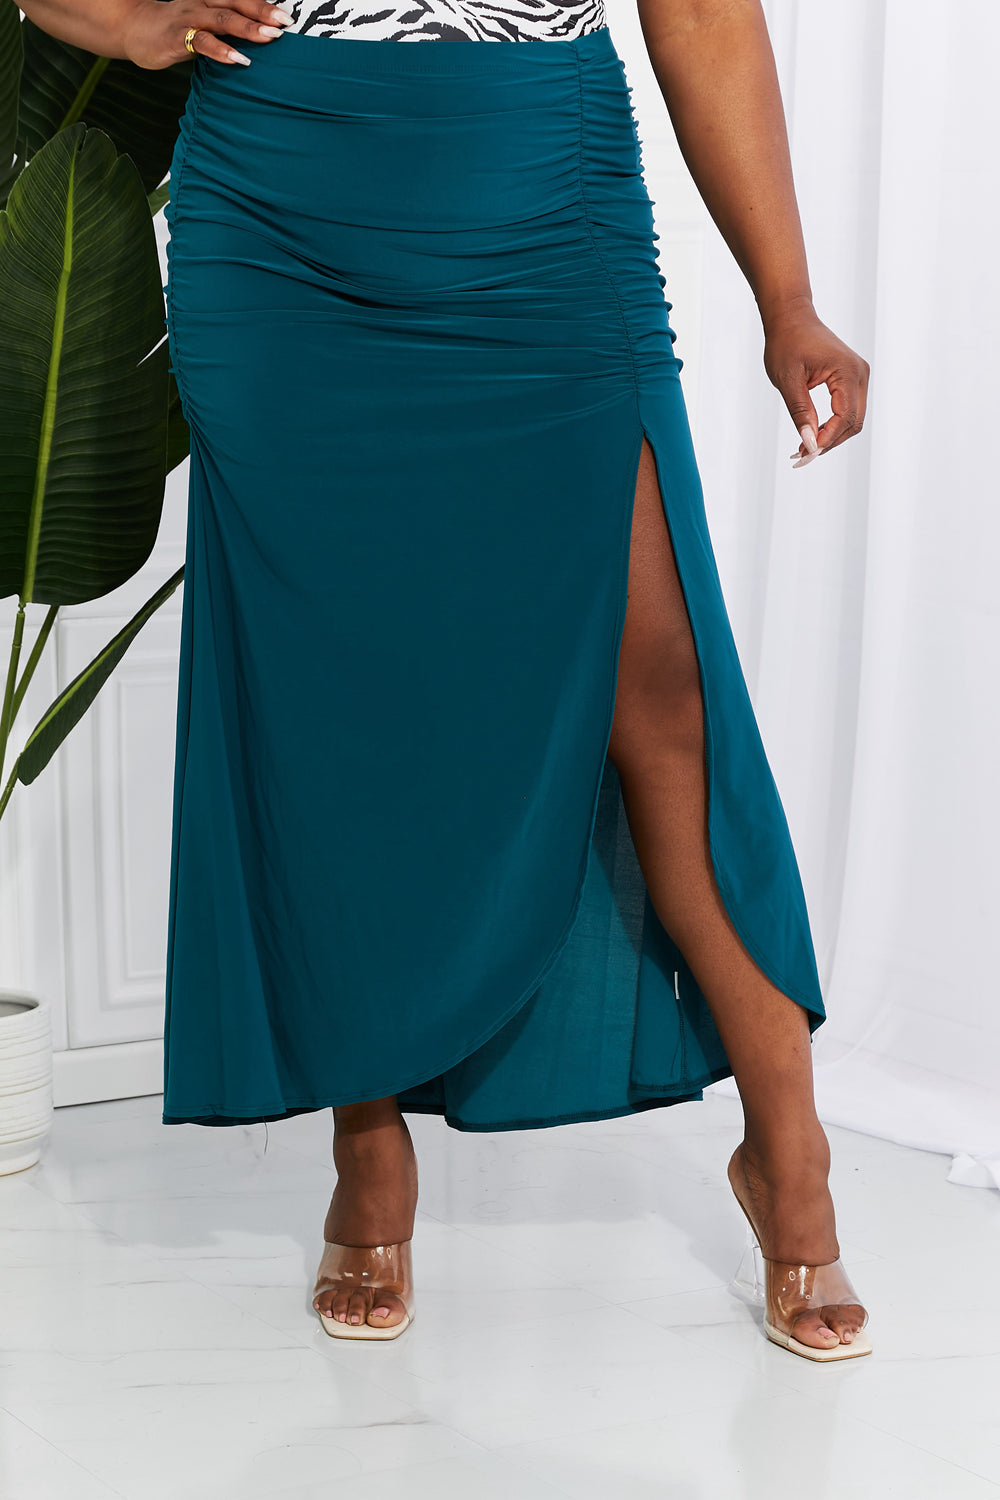 Up Ruched Slit Maxi Skirt in Teal